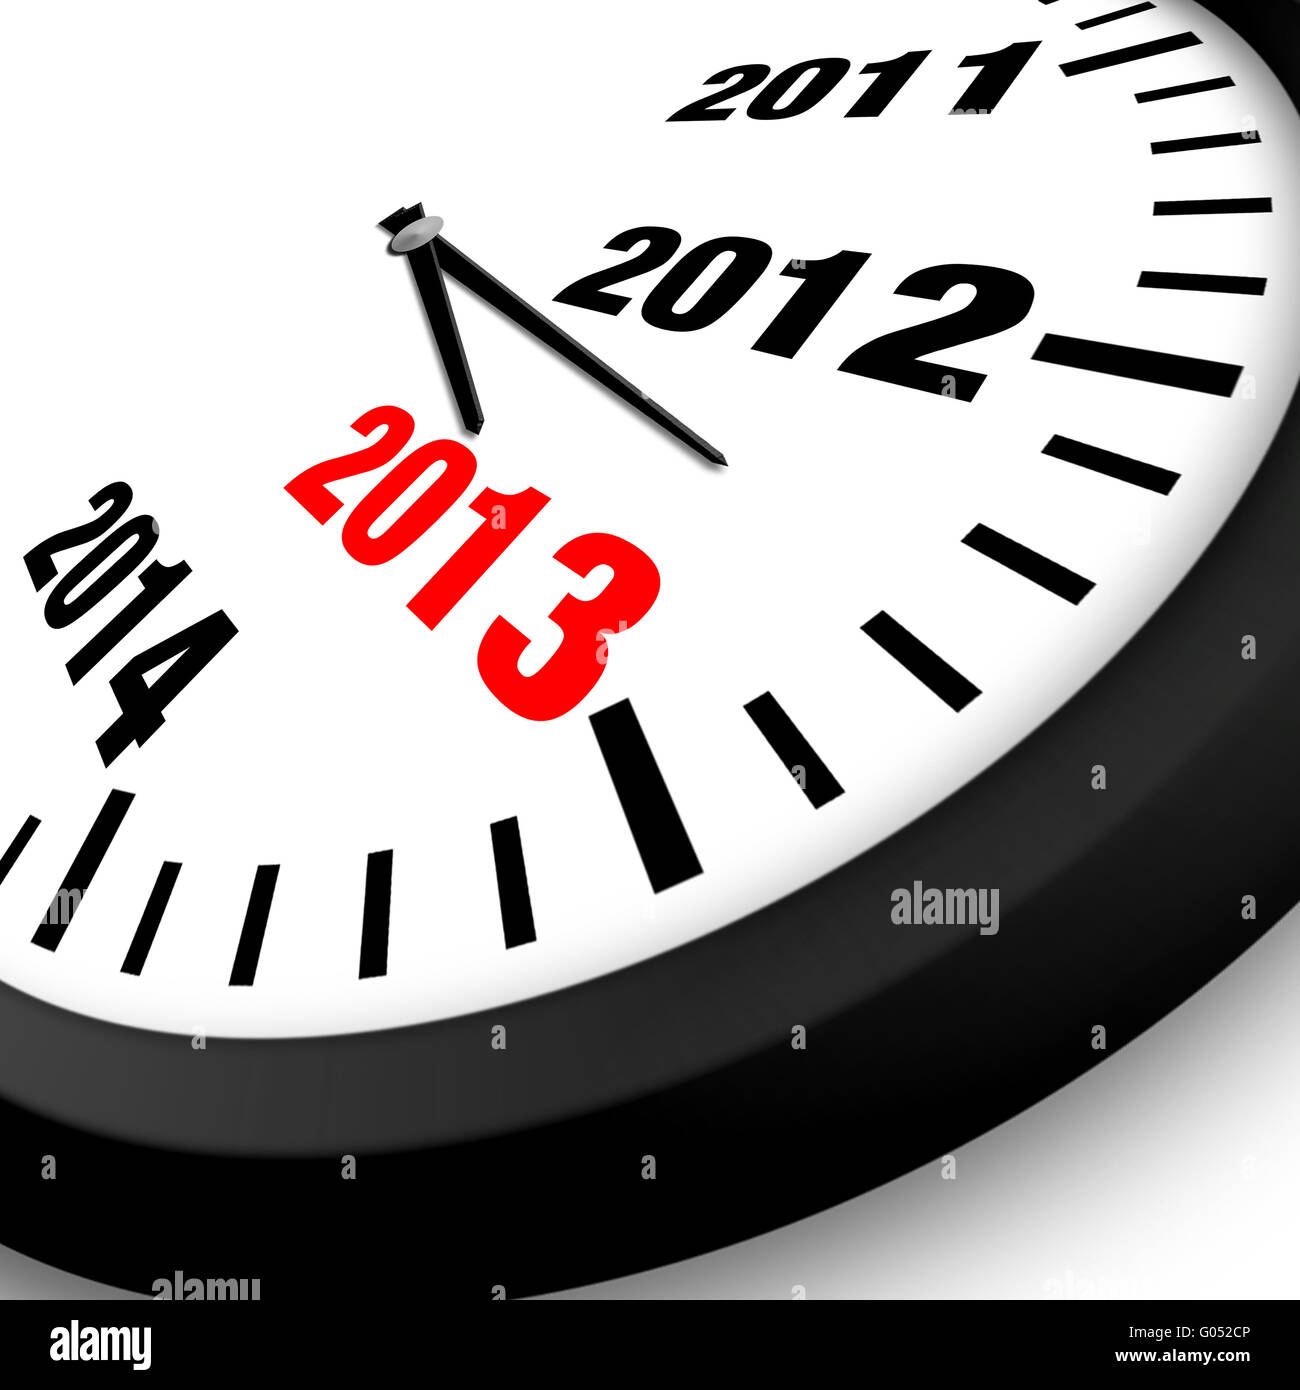 2013 Concept New Year Clock Stock Photo